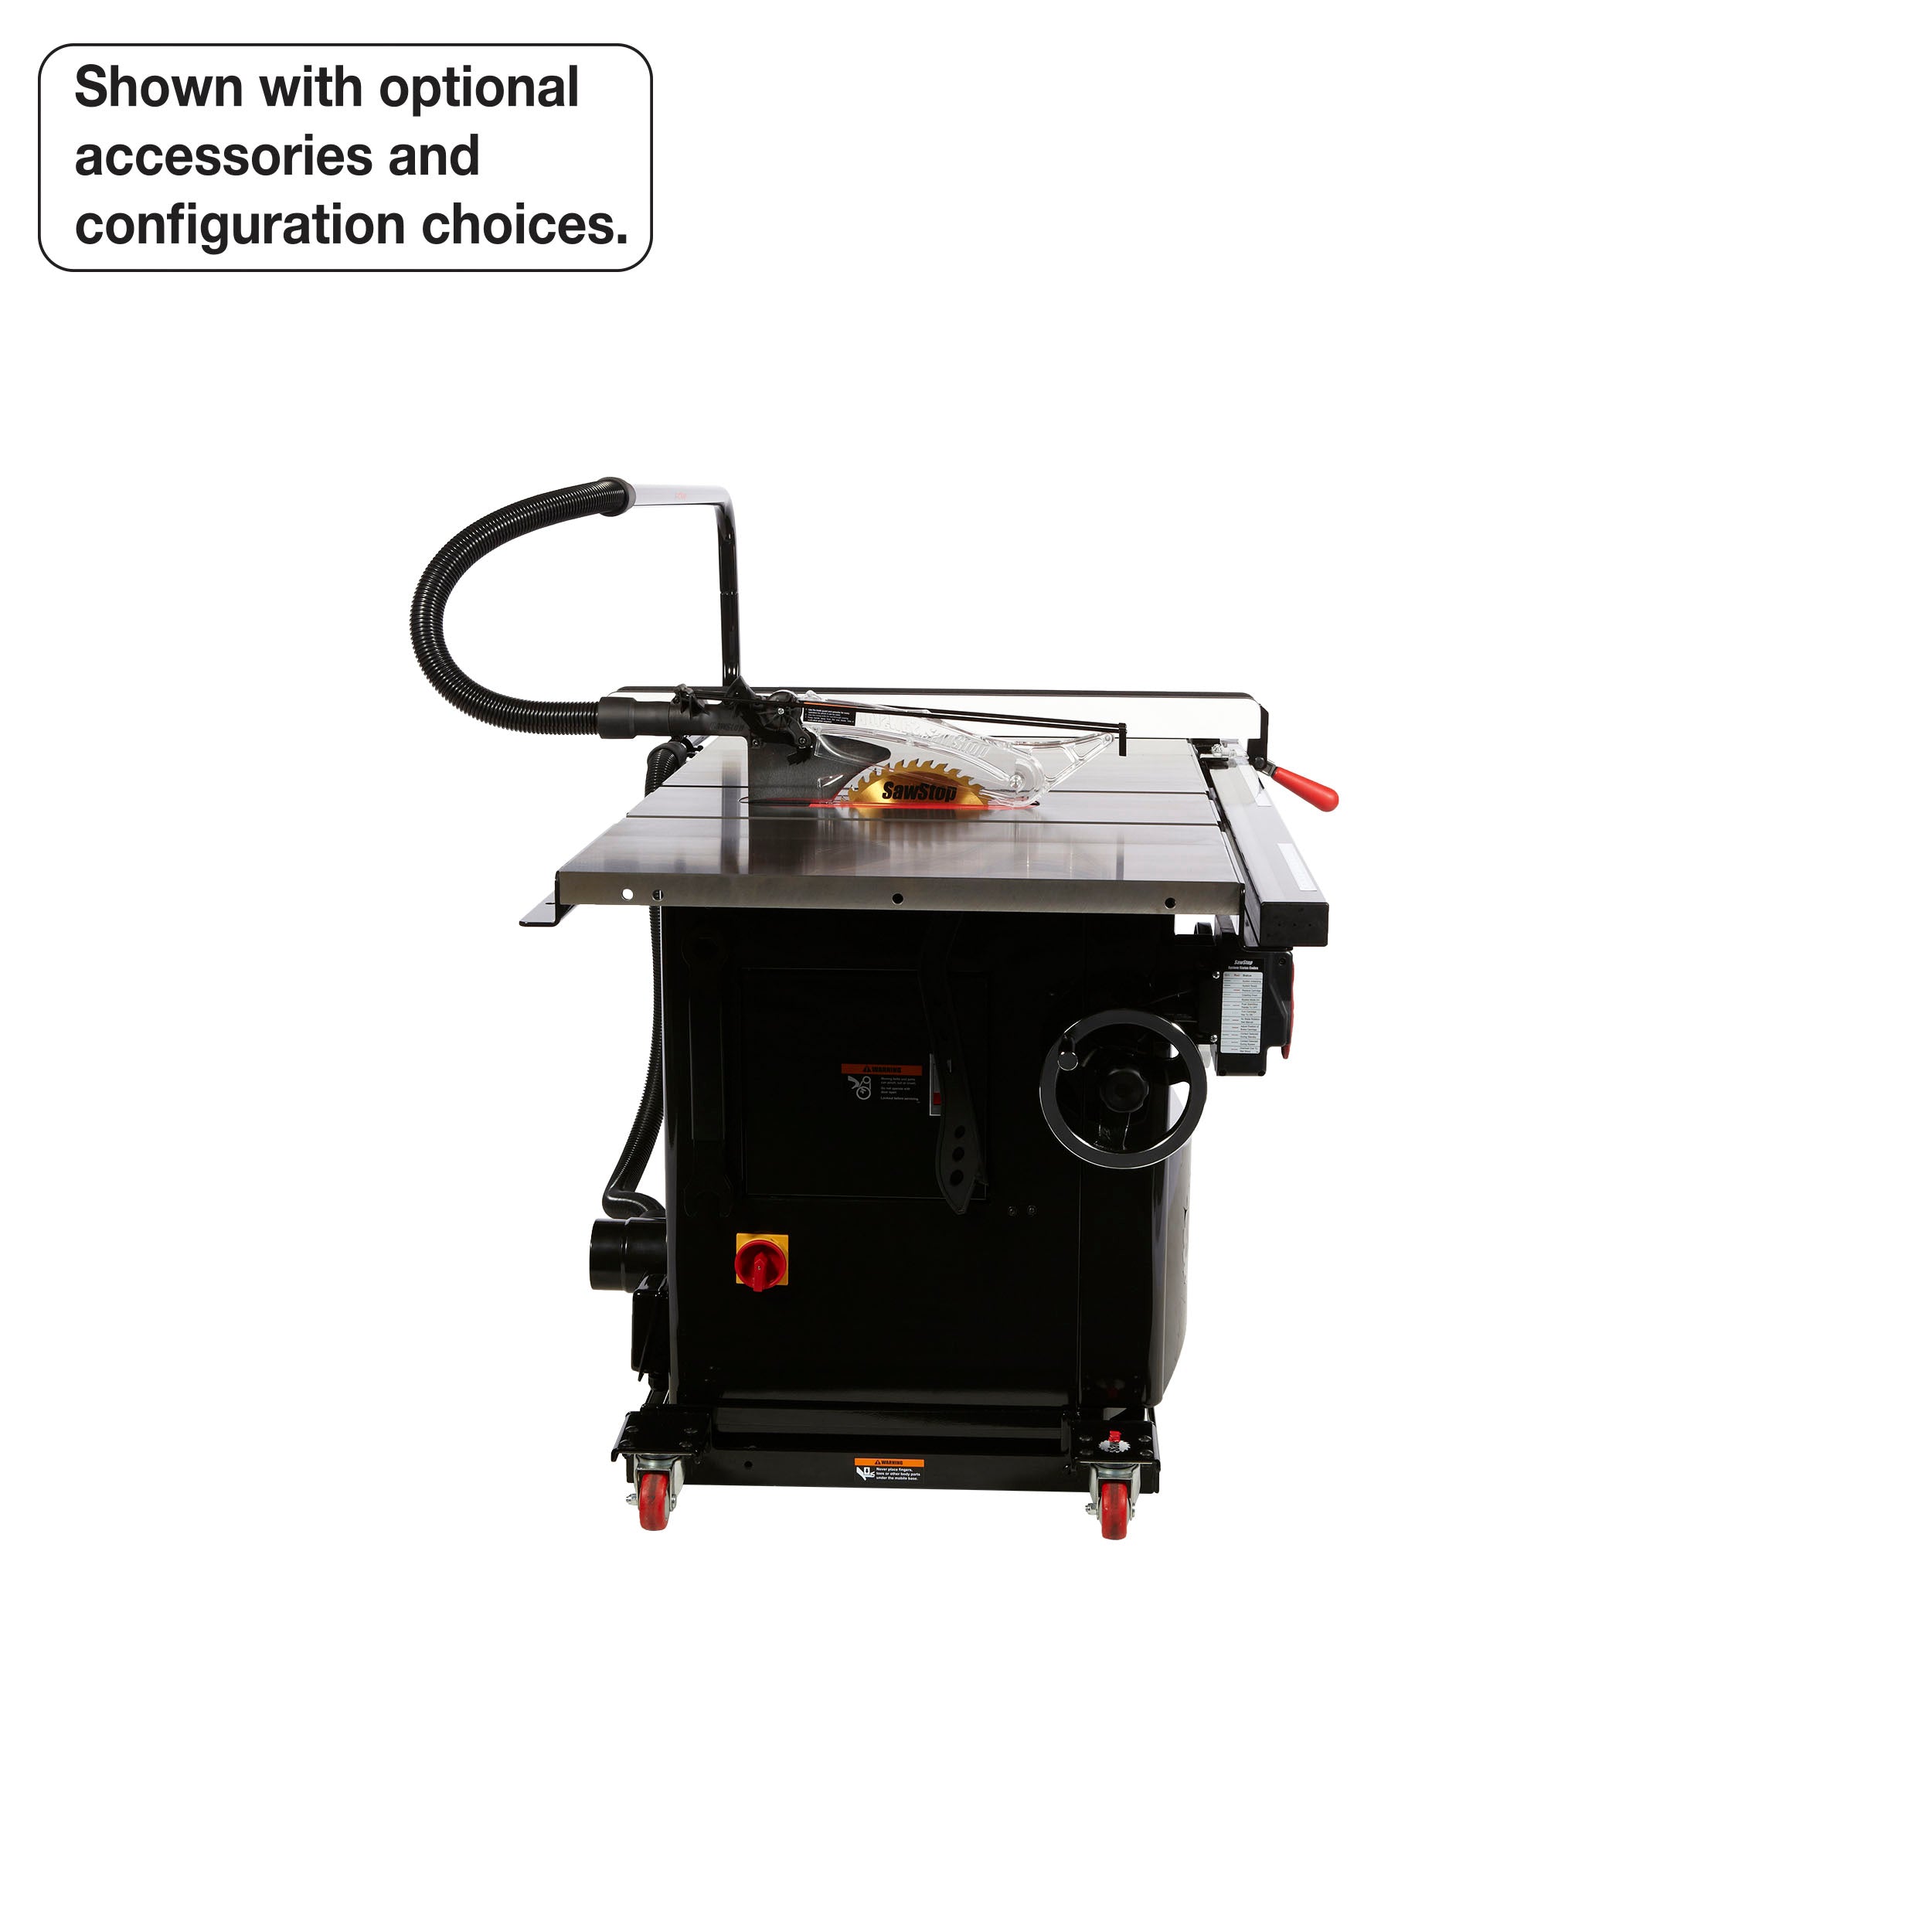 SawStop 5HP, 1ph, 230v Industrial Cabinet Saw w/ 52